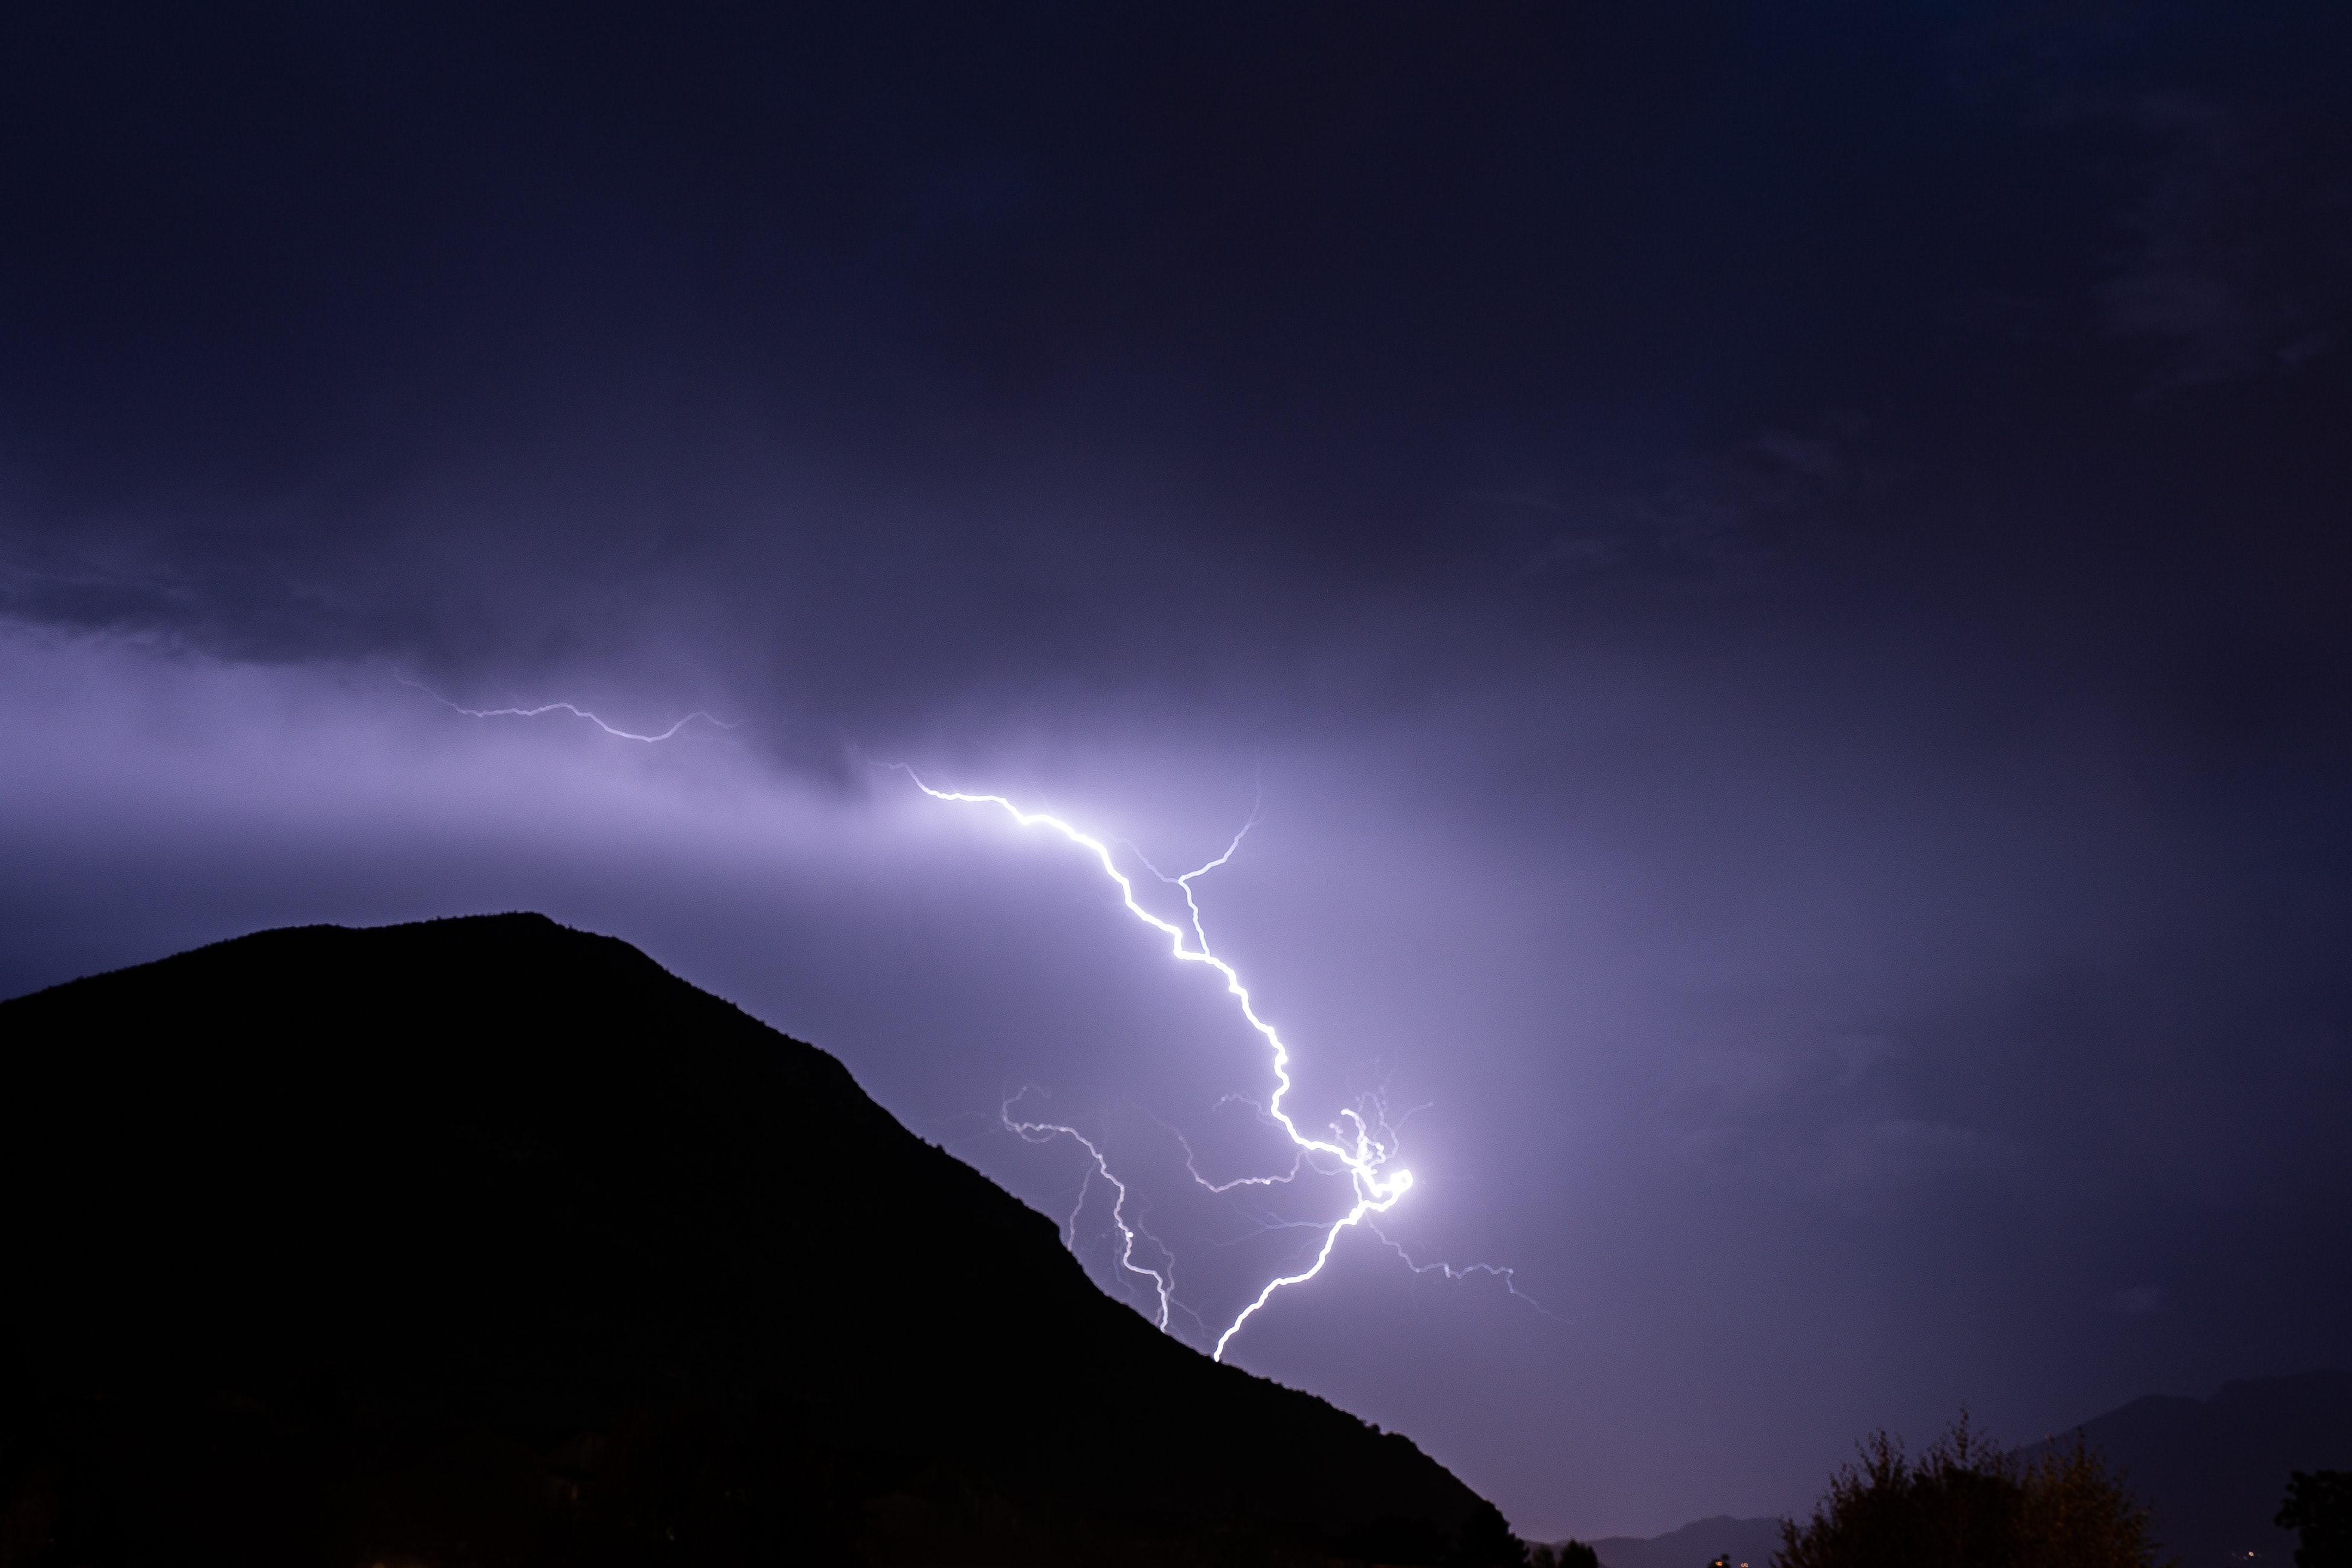 77648 download wallpaper nature, night, lightning, dark screensavers and pictures for free